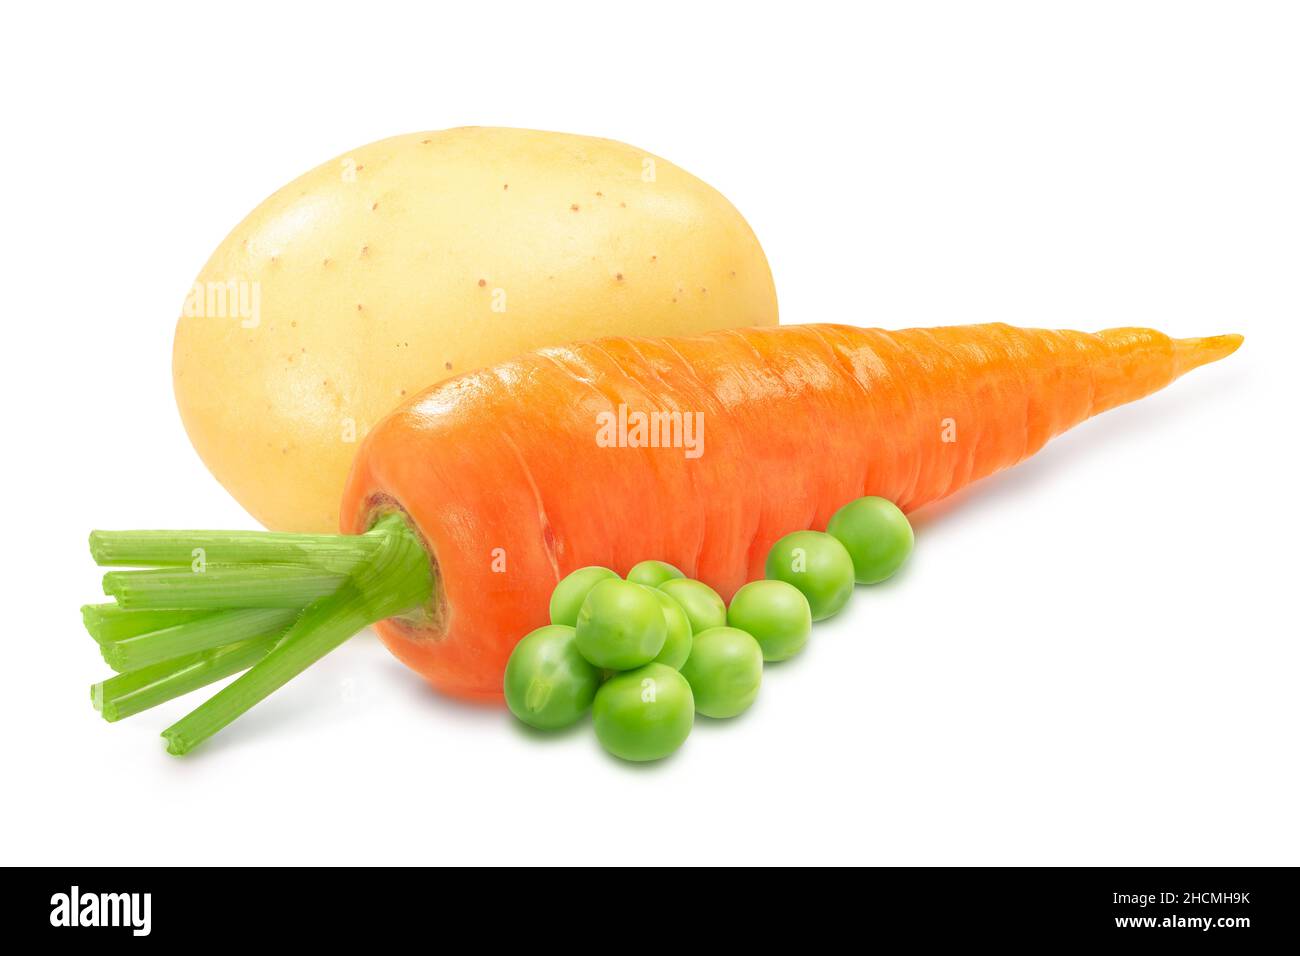 Whole washed carrot with potato and sweet pea seeds isolated Stock Photo